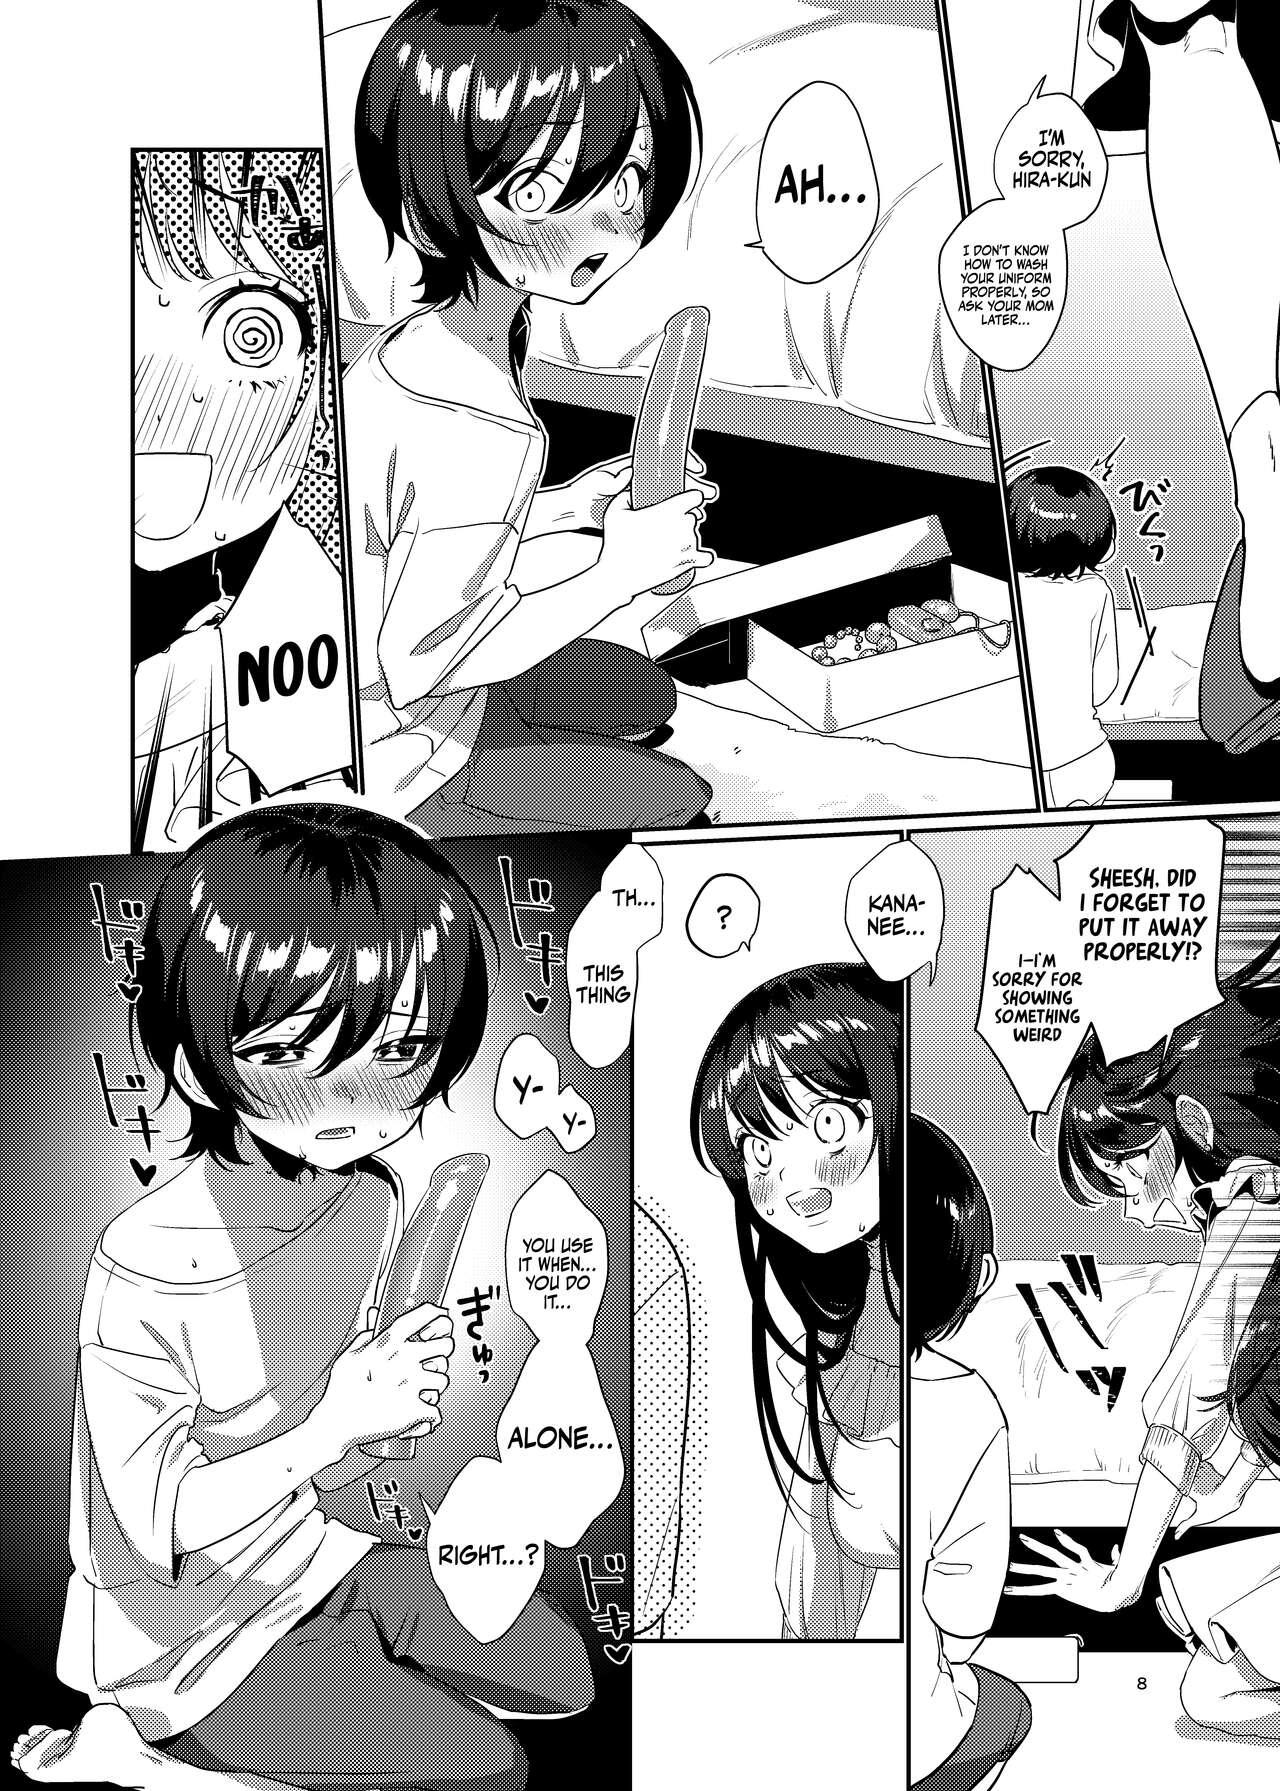 Best Blowjobs Ame, Nochi to Nari no Onee-san | Ame, Later Sister - Original Fellatio - Page 7